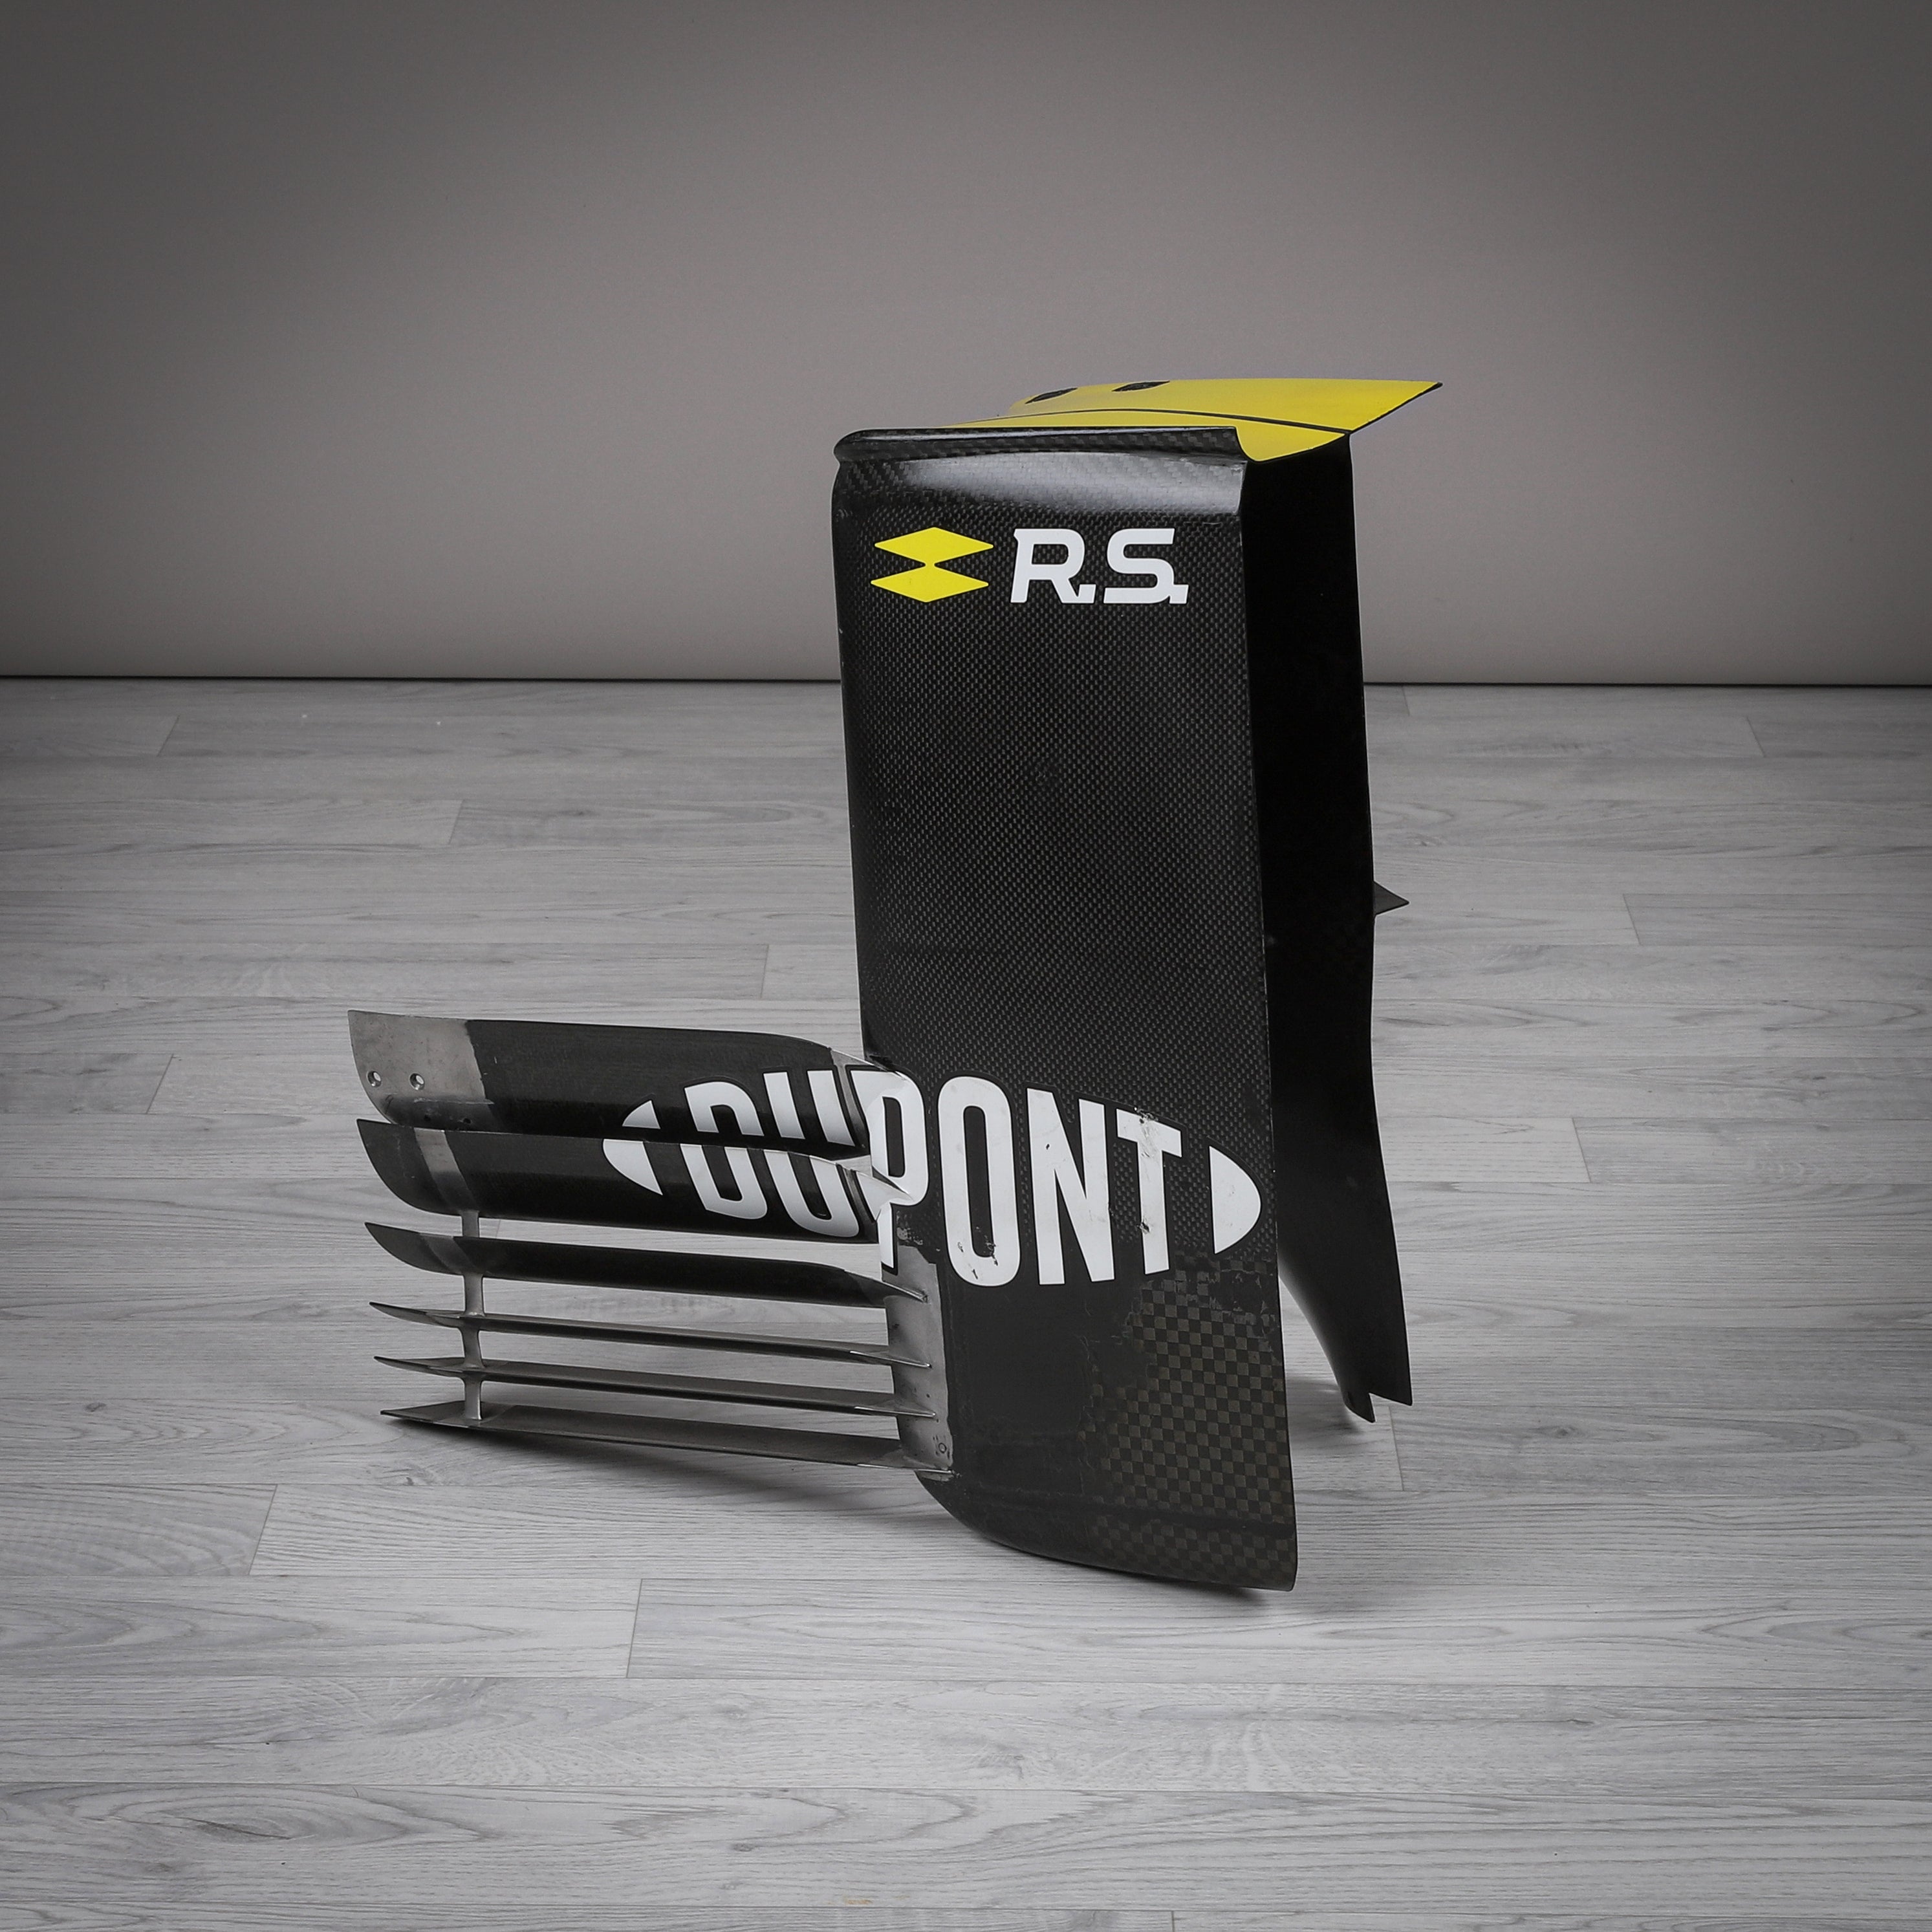 Renault F1 Team 2020 Left-Hand Sidepod Leading Edge with Dupont Branding